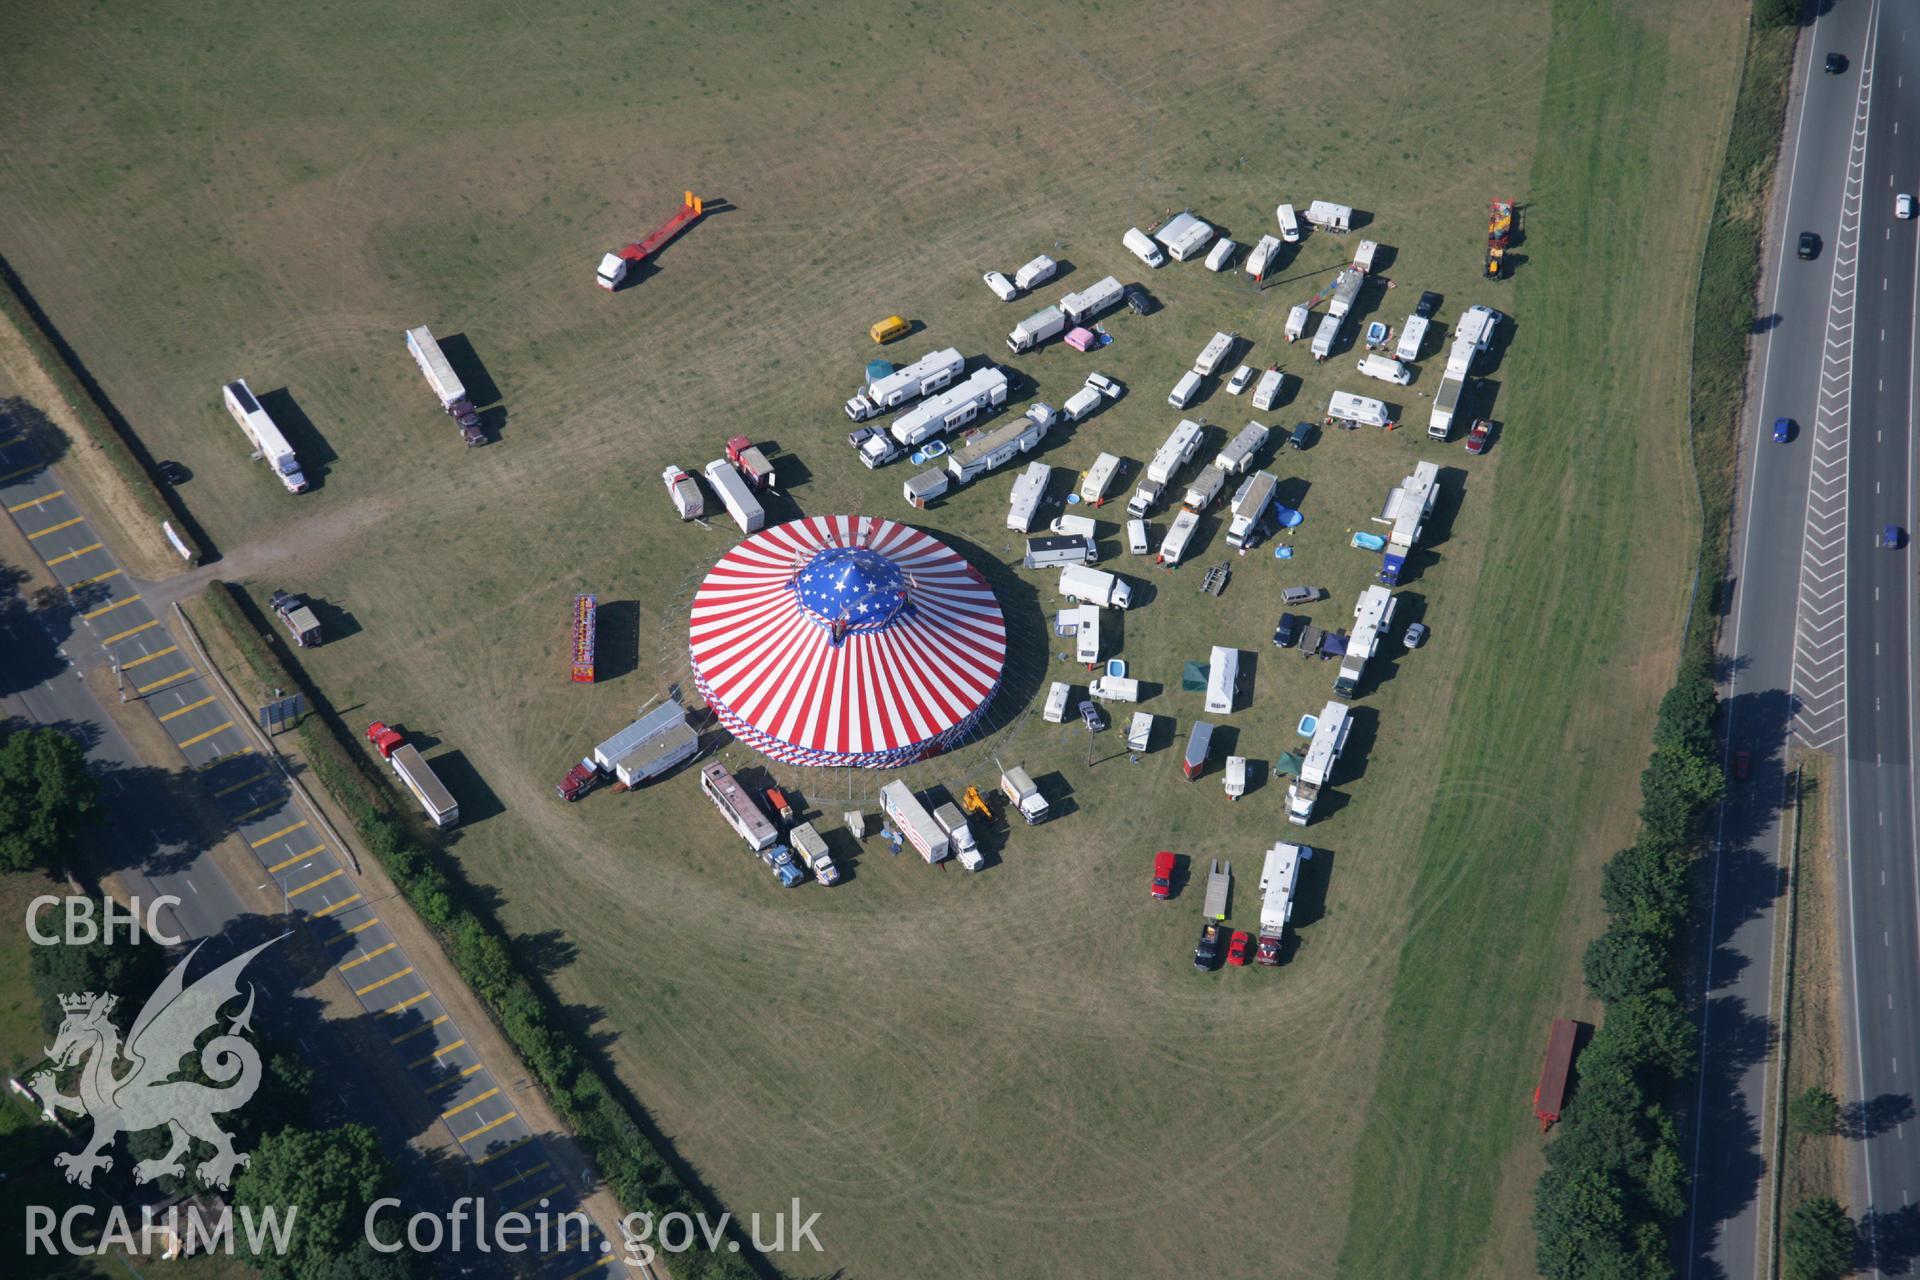 RCAHMW colour oblique aerial photograph of Wrexham showing the American fair. Taken on 17 July 2006 by Toby Driver.